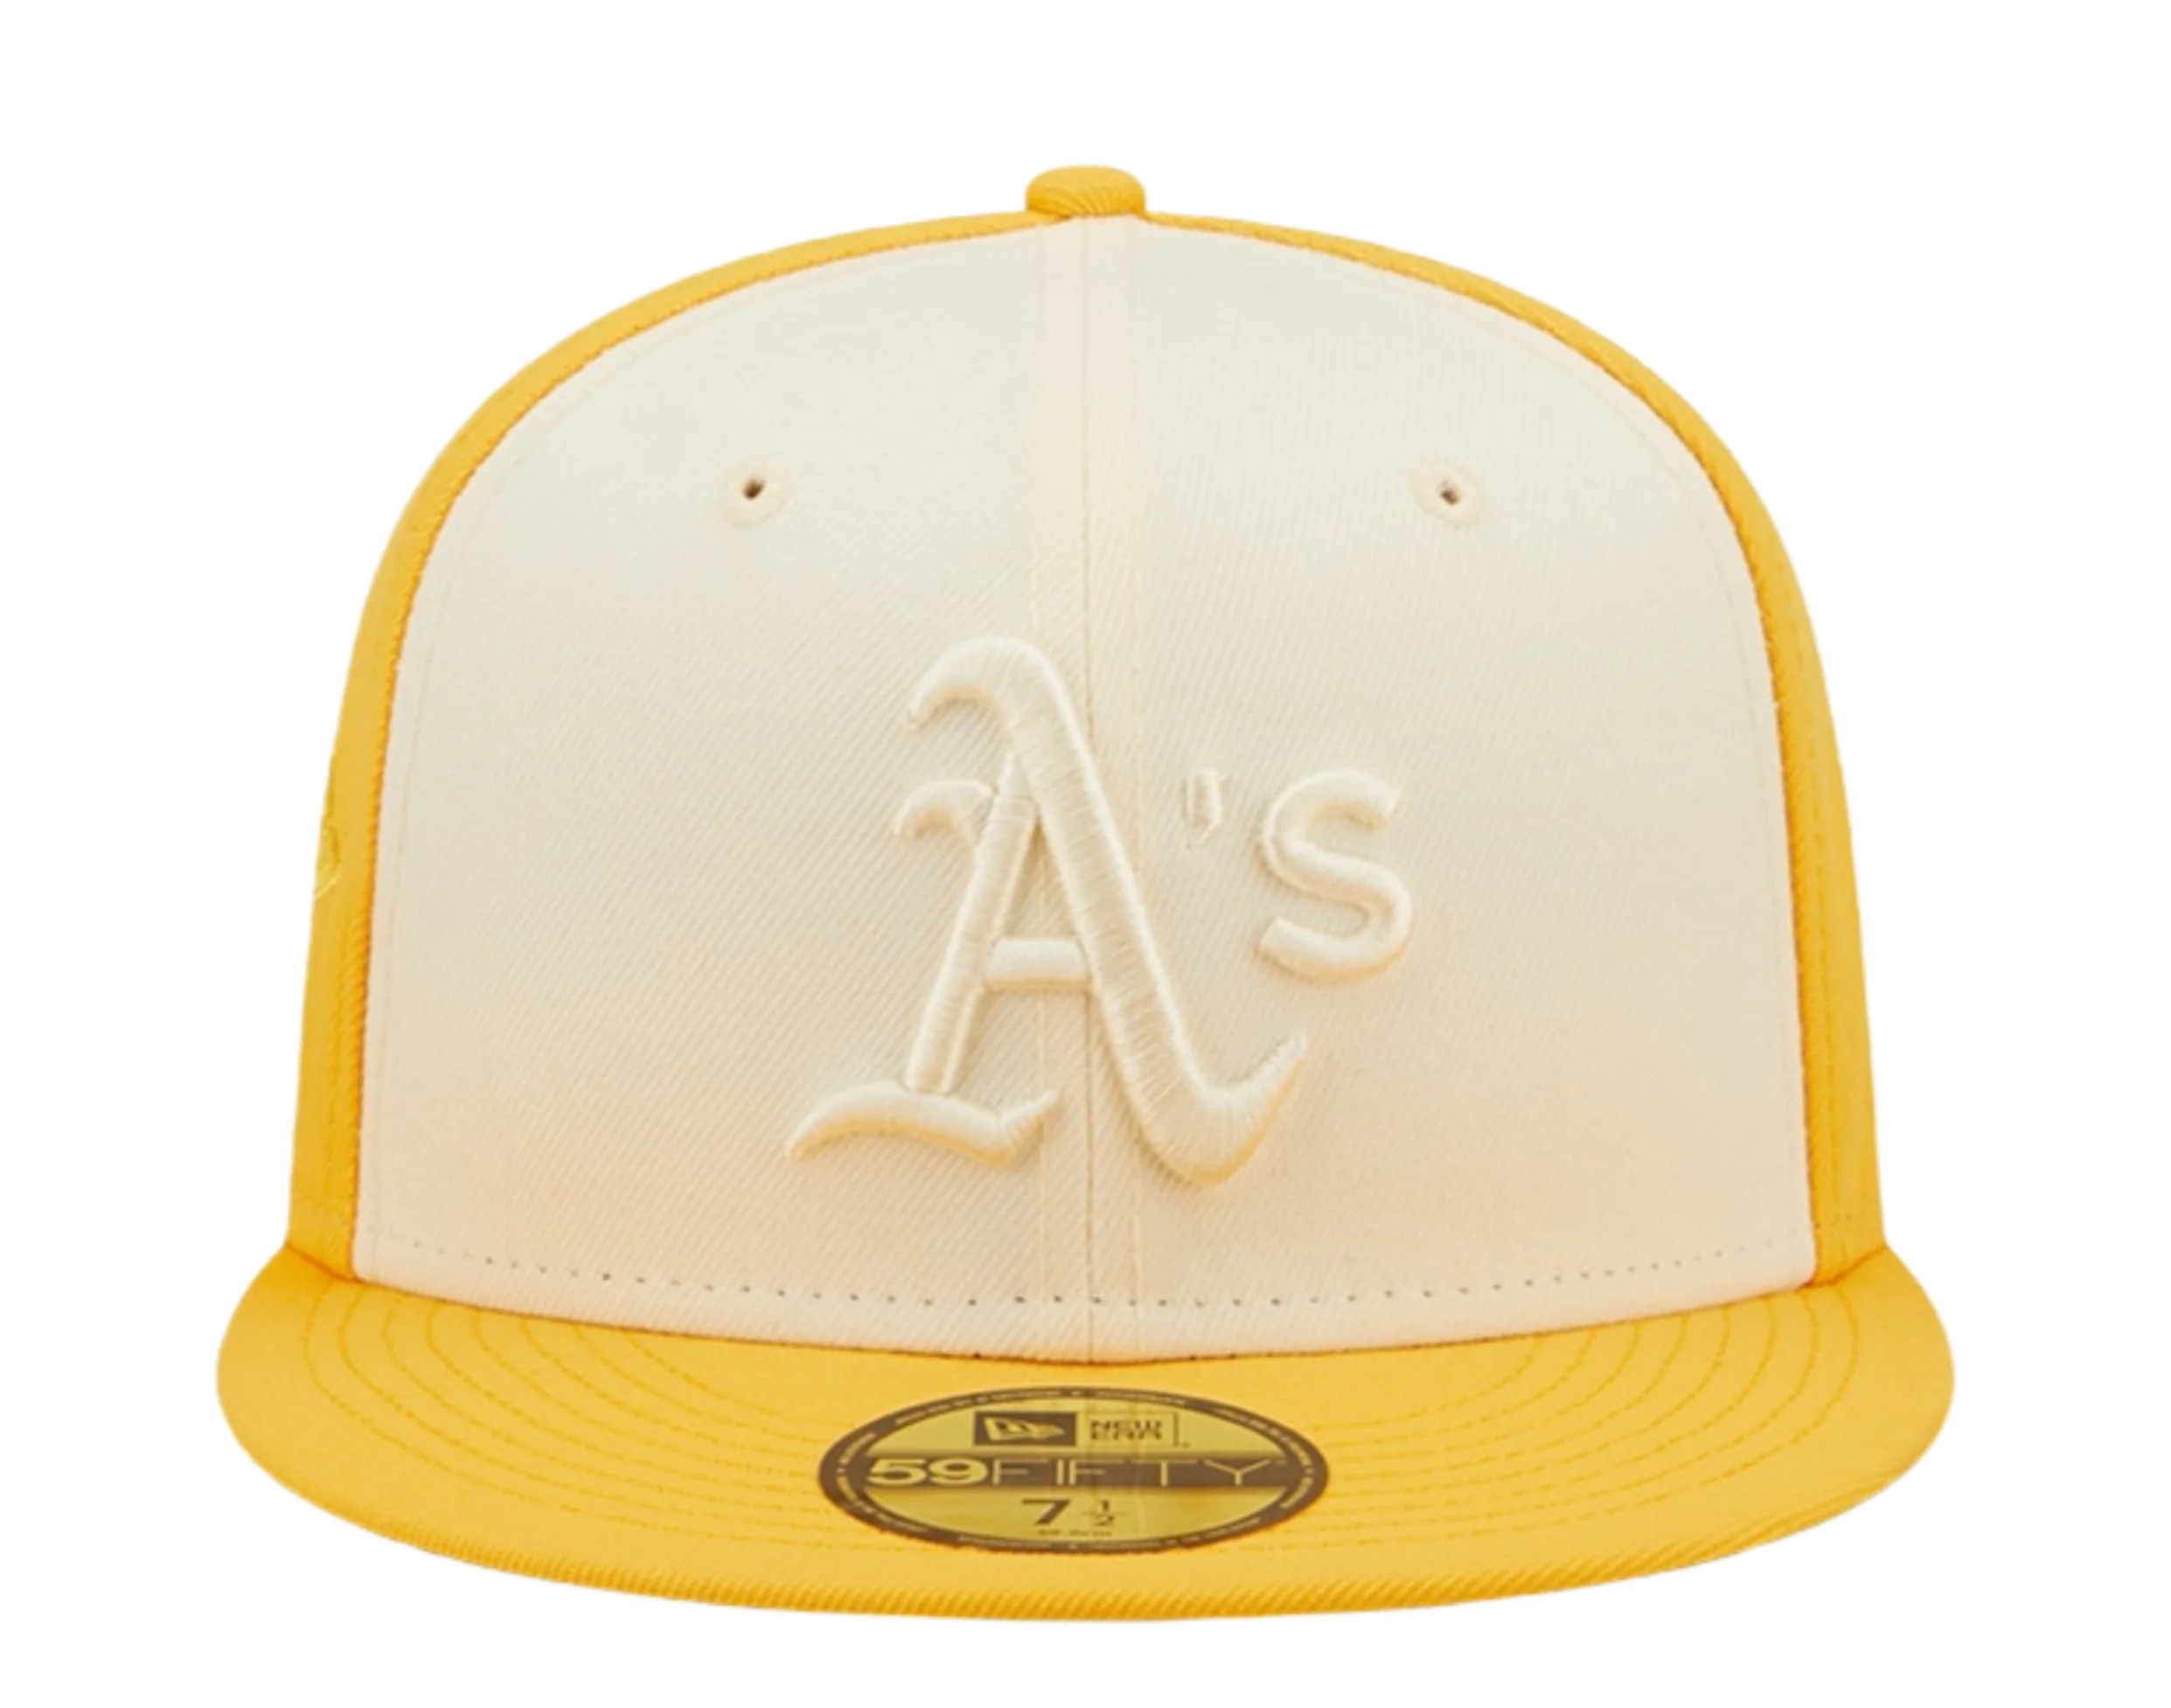 NEW ERA OAKLAND ATHLETICS 2-TONE 59FIFTY FITTED HAT-YELLOW/CREAM